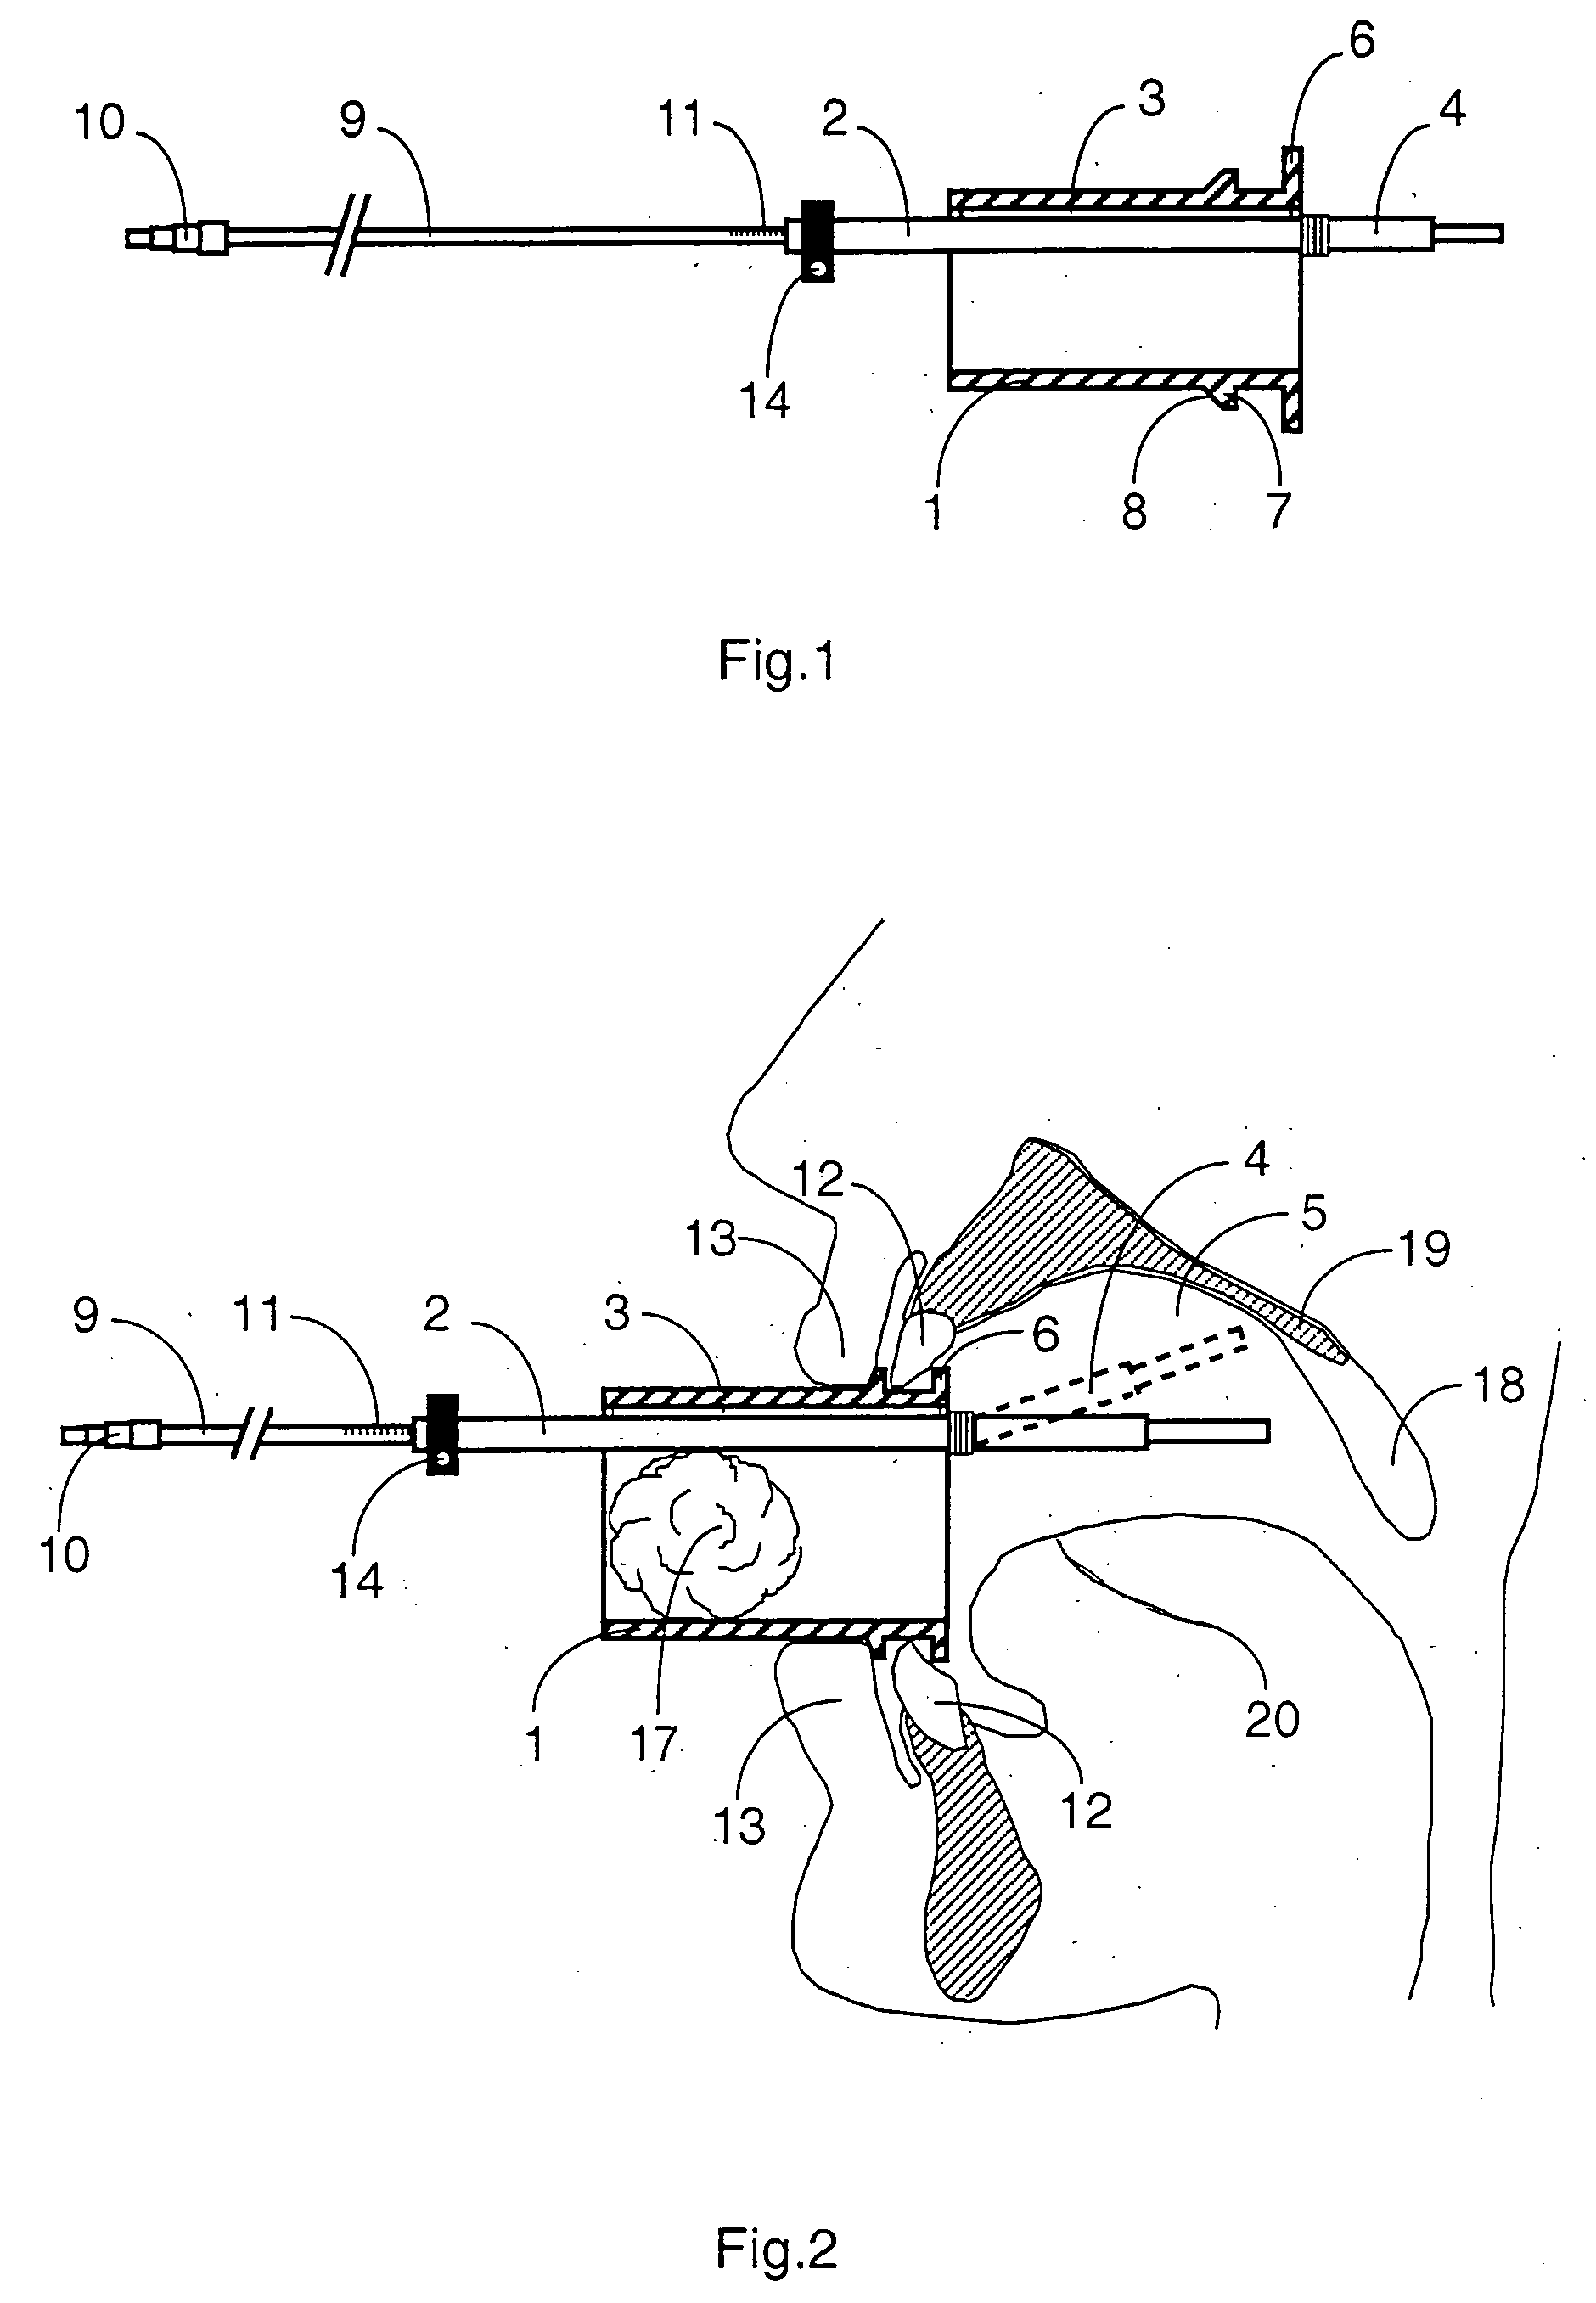 Mouthpeice intended for a device used to assess the sensitivity of the pharynx and a device comprising same